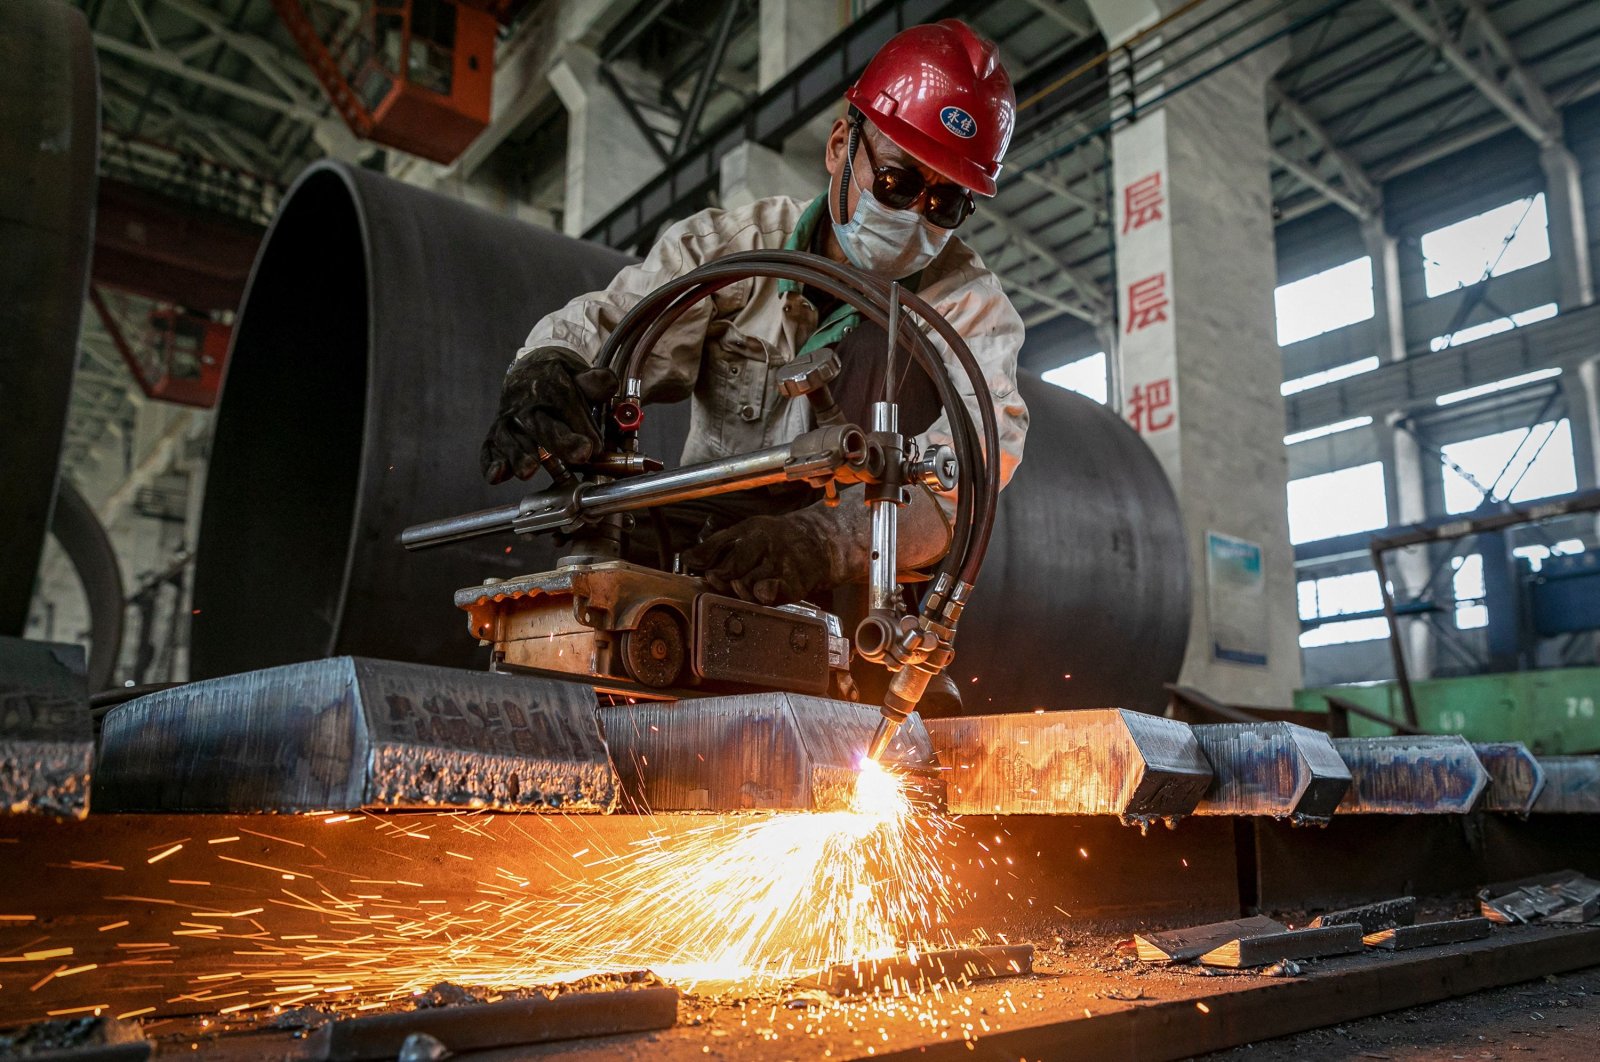 A worker produces manufacturing machinery at a factory in Nantong, in eastern Jiangsu province, China, May 26, 2021. (AFP Photo)